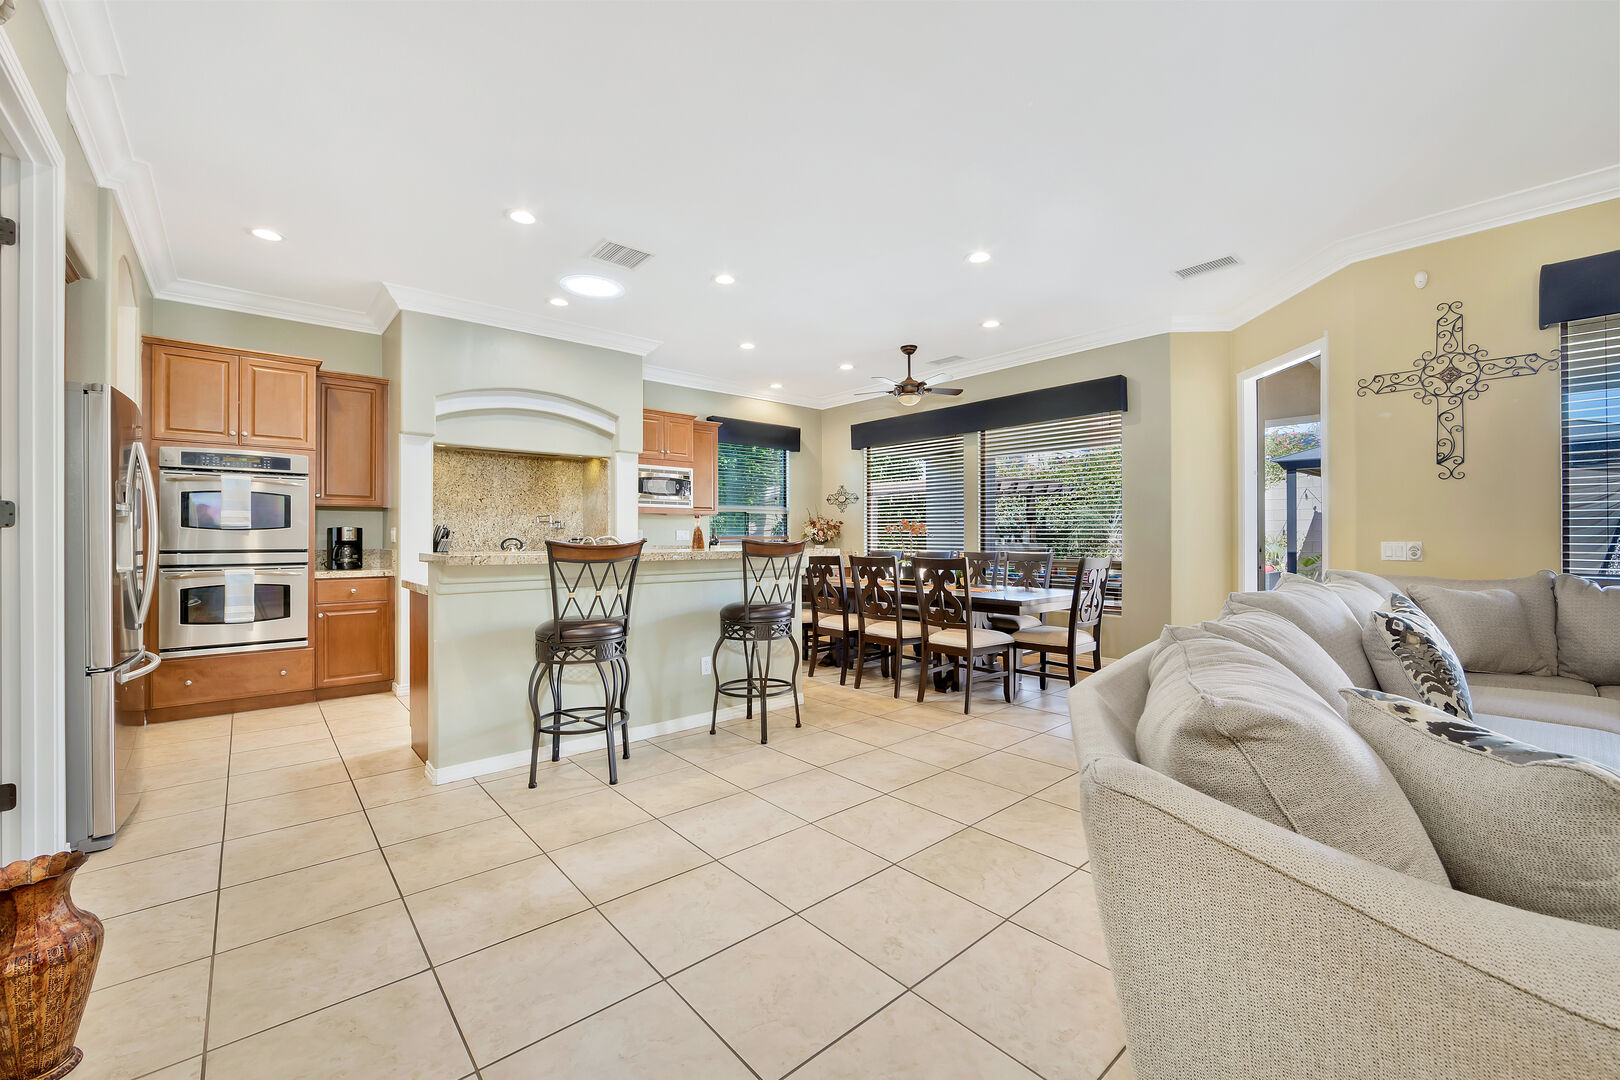 The open floor plan allows for an easy flow between the living area, kitchen and formal dinning.